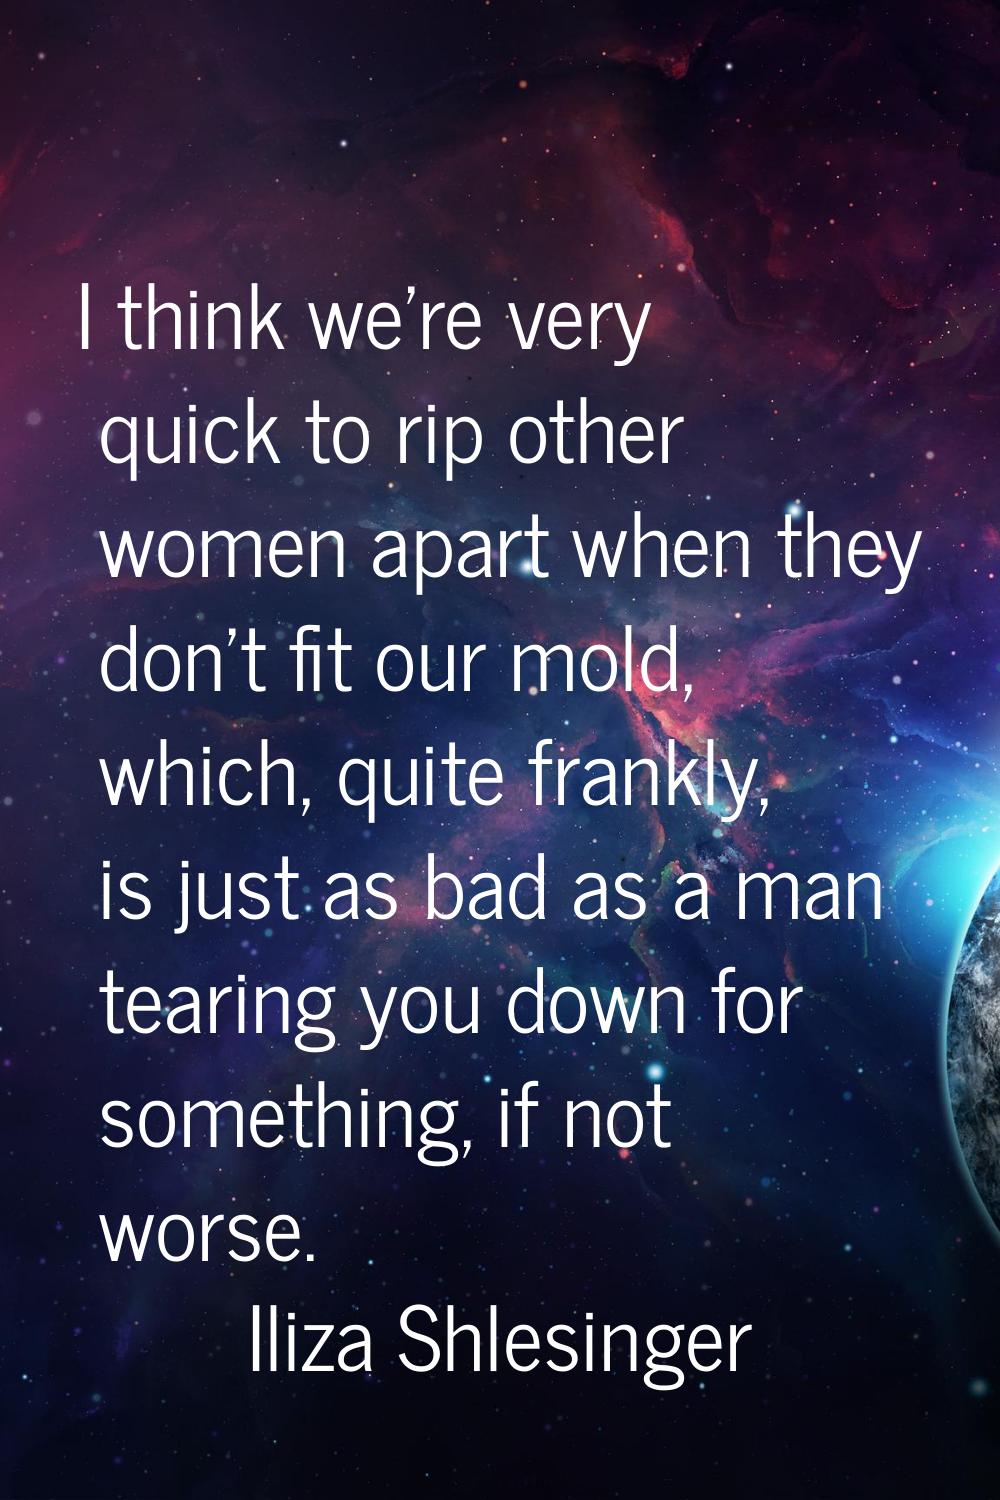 I think we're very quick to rip other women apart when they don't fit our mold, which, quite frankl